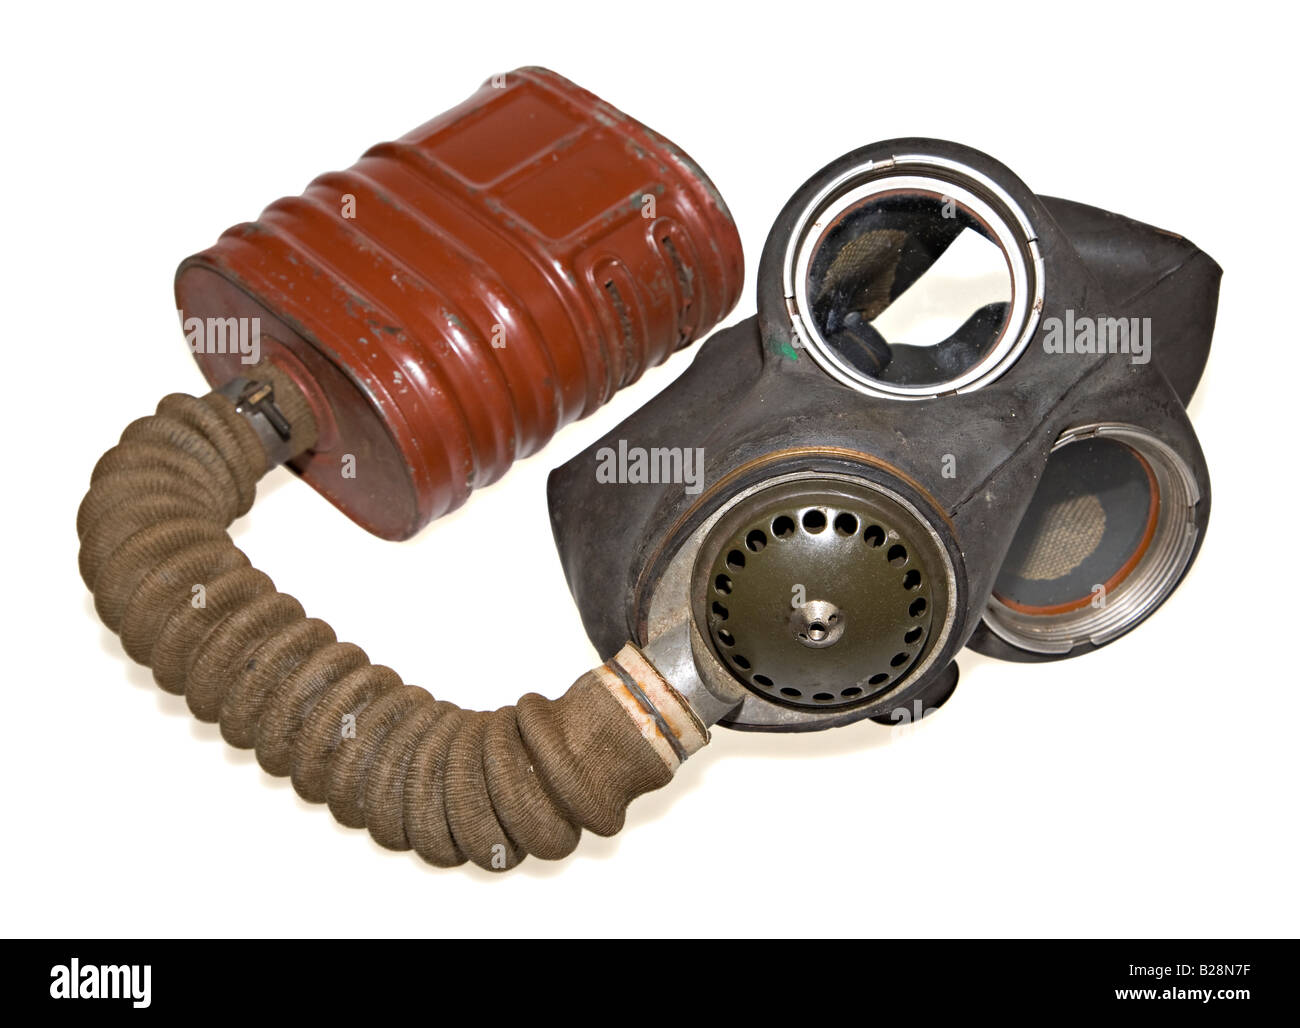 British firemans gas mask used in Second World War with larger capacity than standard civilian issue UK Stock Photo